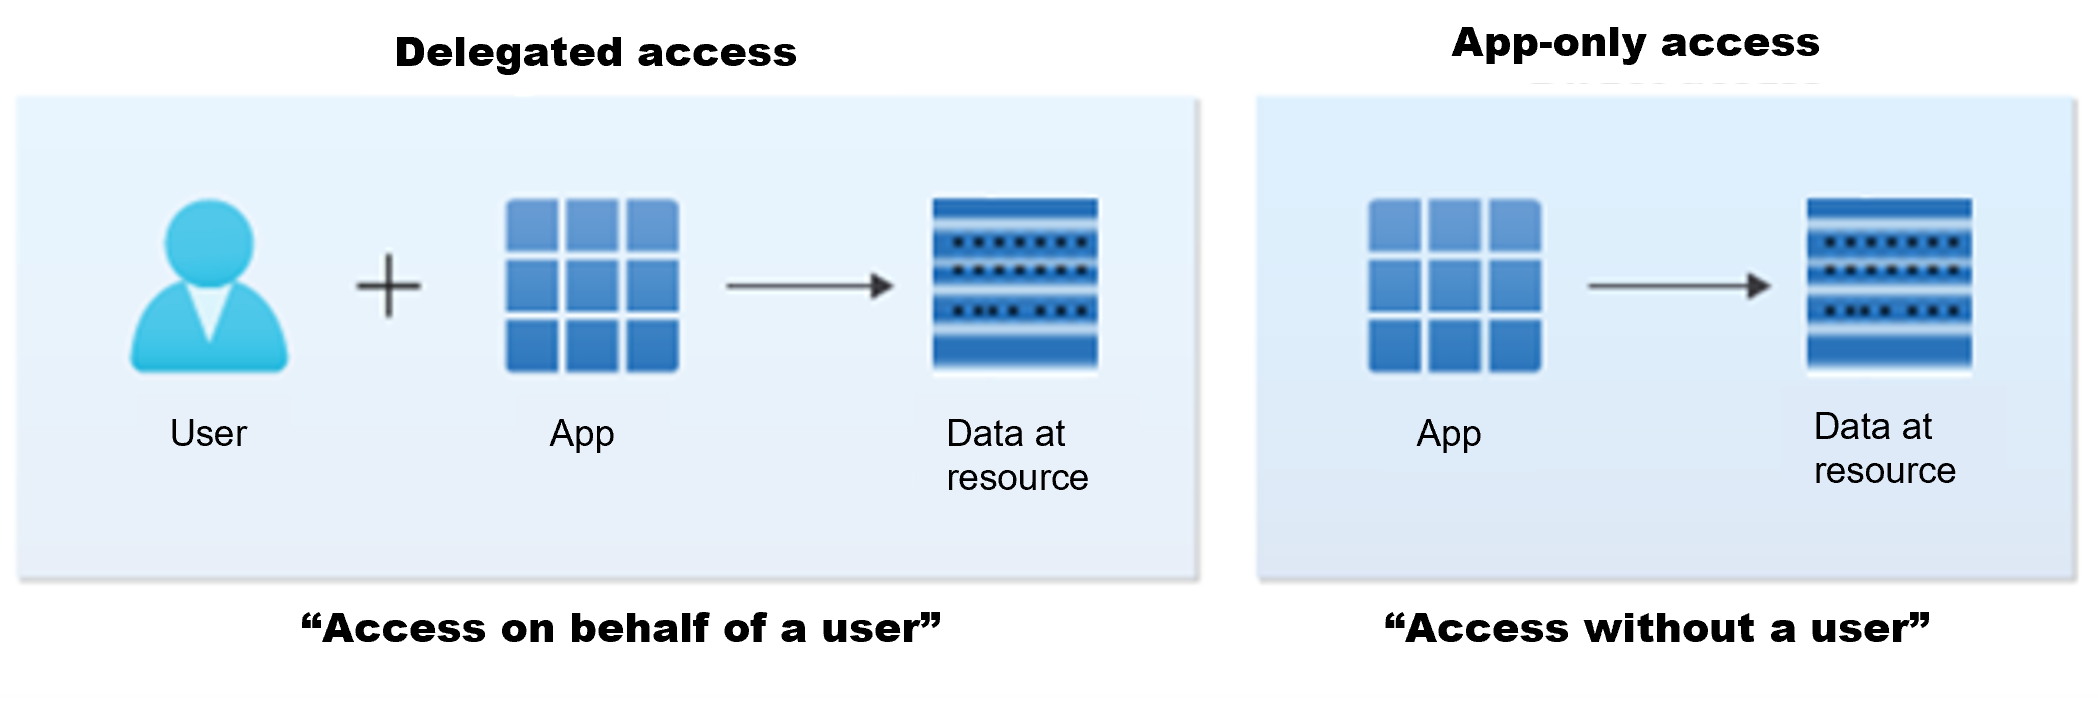 Illustration of delegated and app-only access scenarios in the Microsoft identity platform.